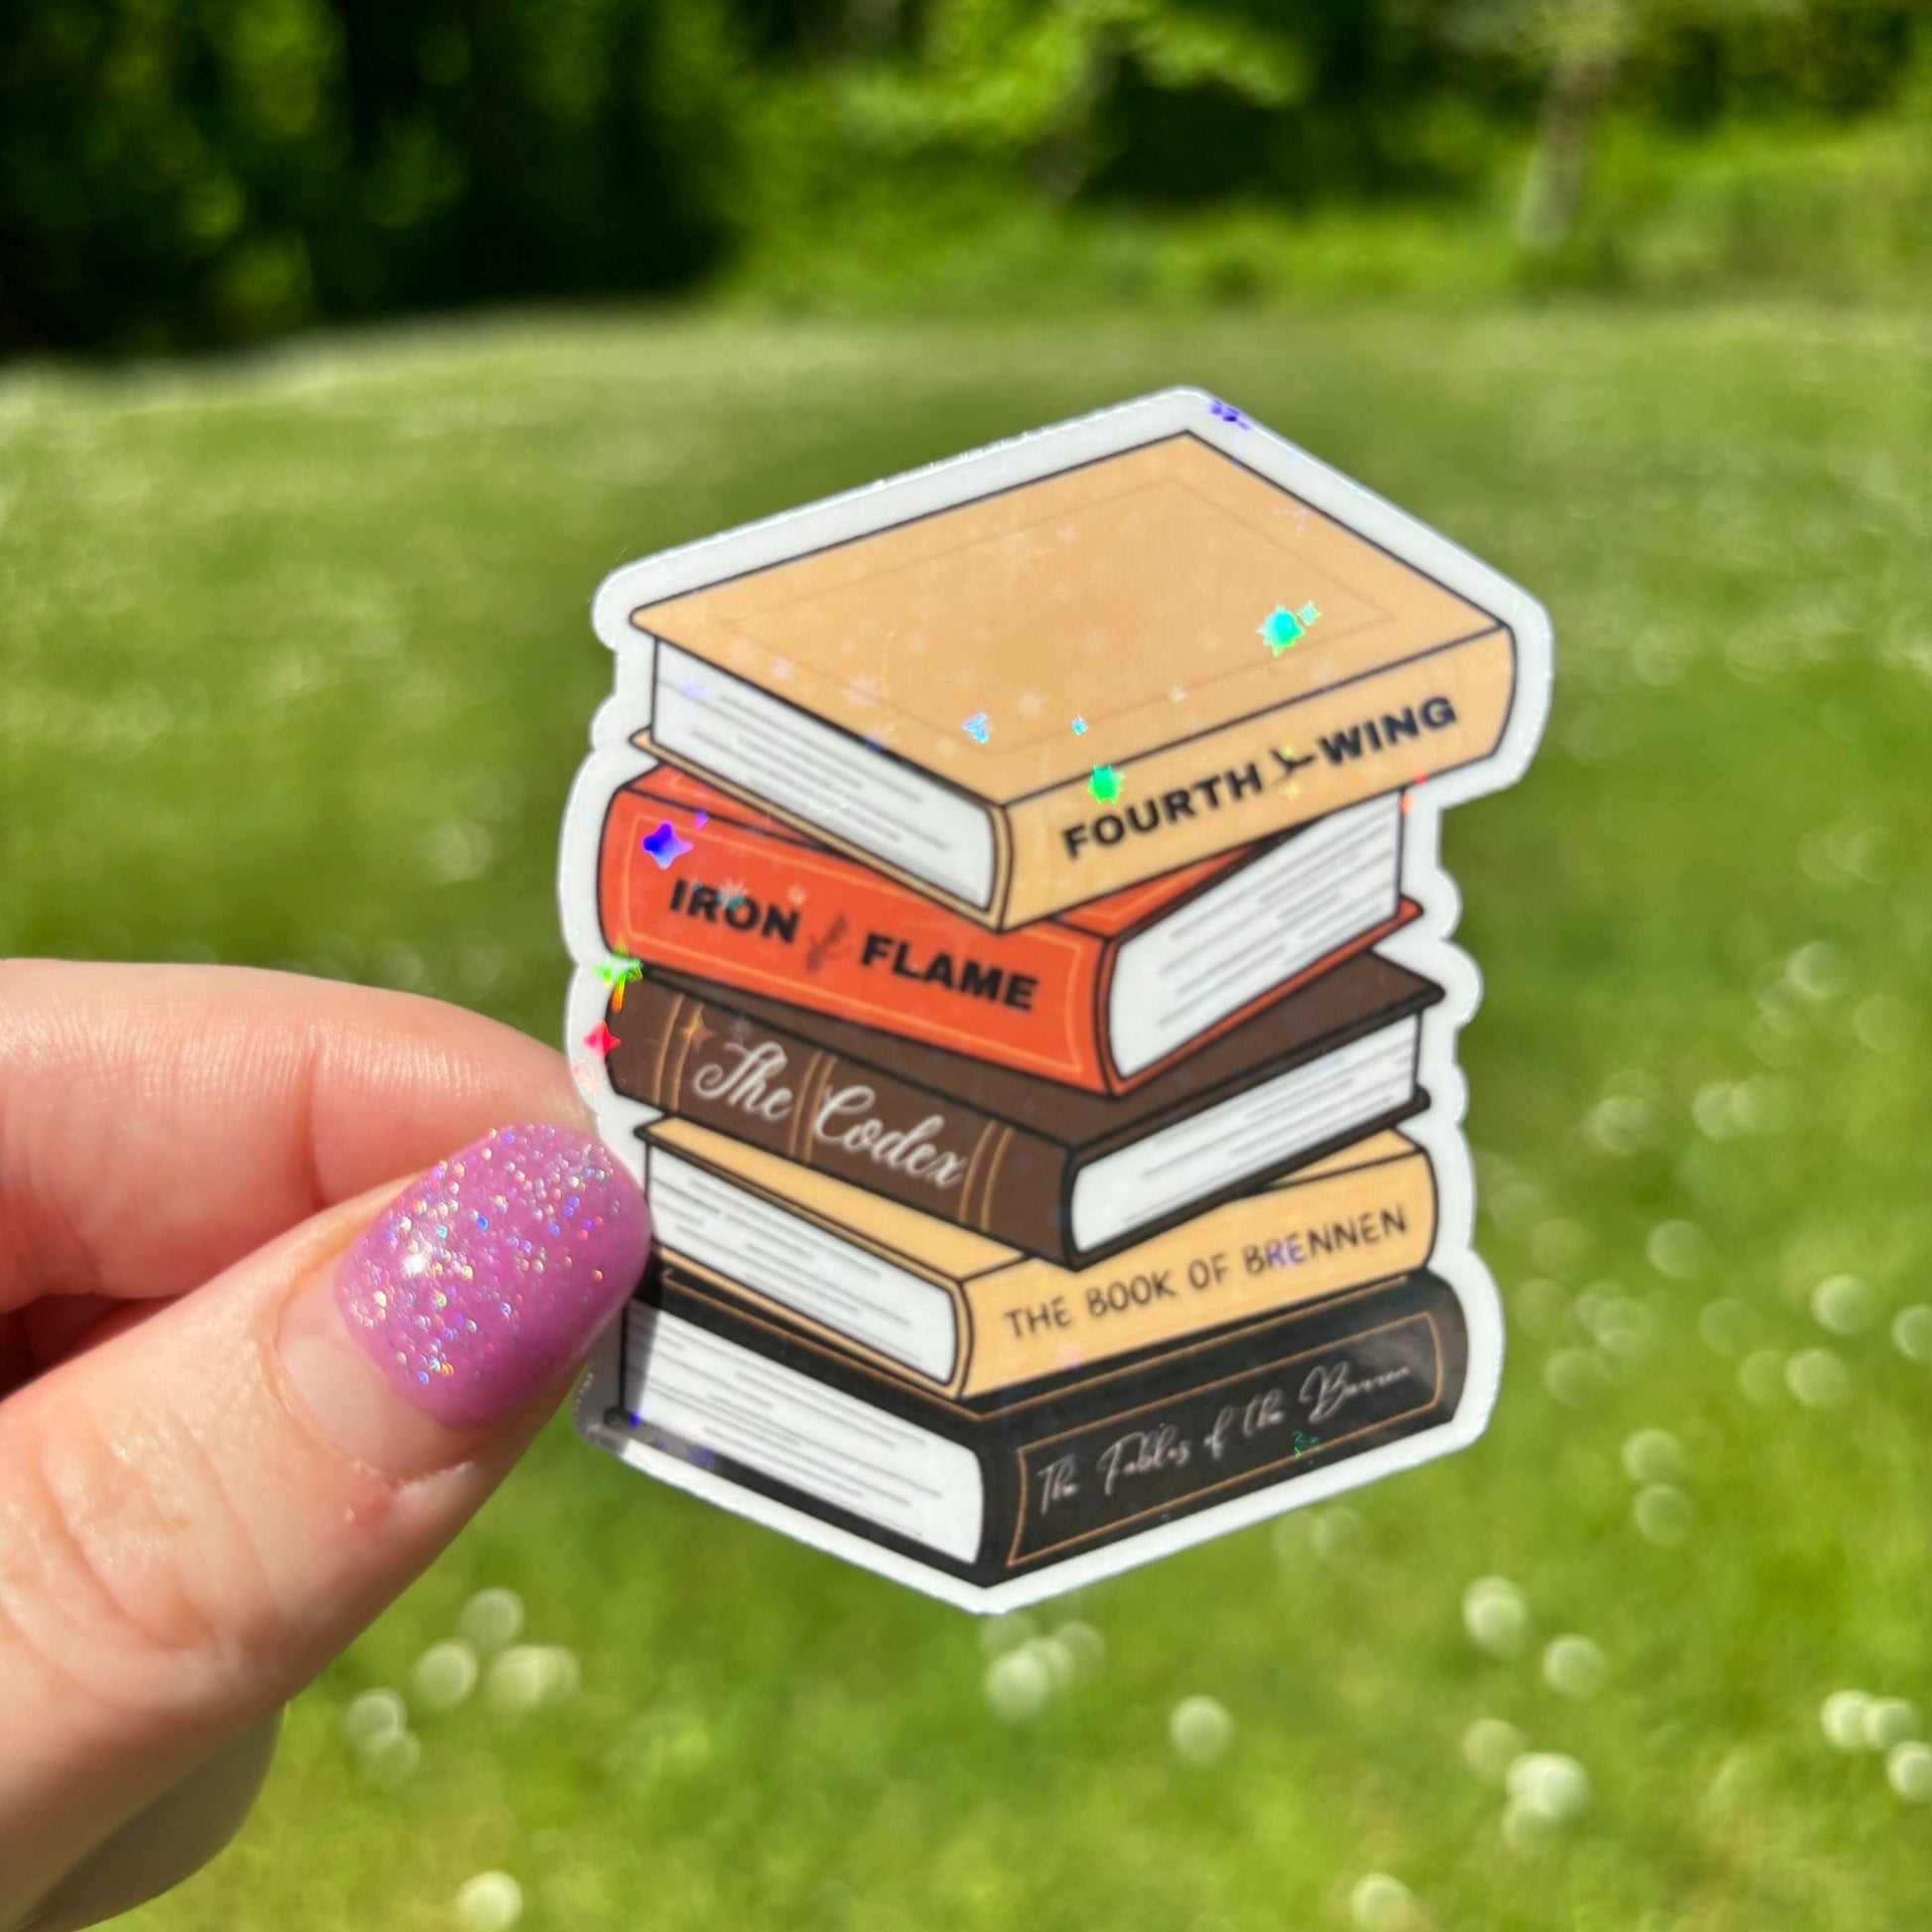 Fourth Wing Inspired Books Sticker - Awfullynerdy.co